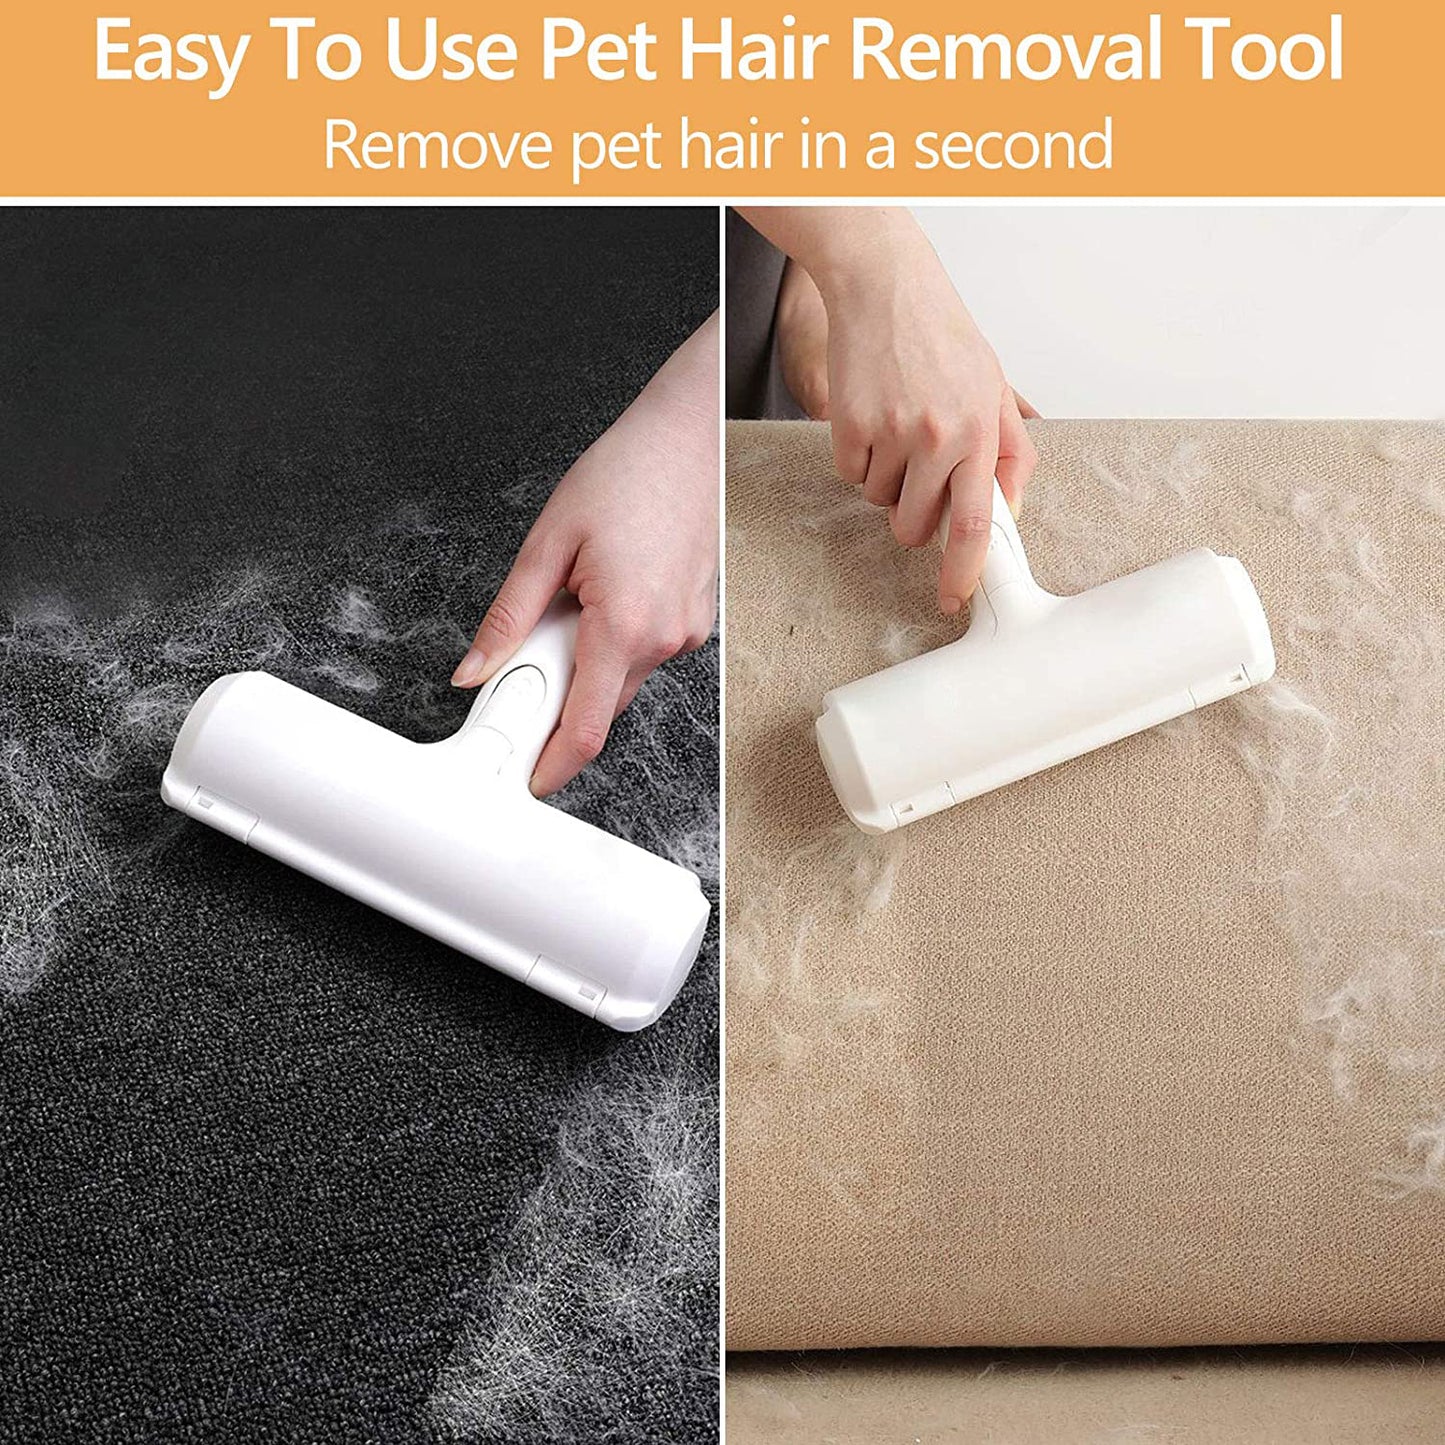 Pet Hair Remover Roller - Dog & Cat & Fur Remover with Self-Cleaning Base - Efficient Animal Hair Removal Tool - Perfect for Furniture, Couch, Carpet, Car Seat